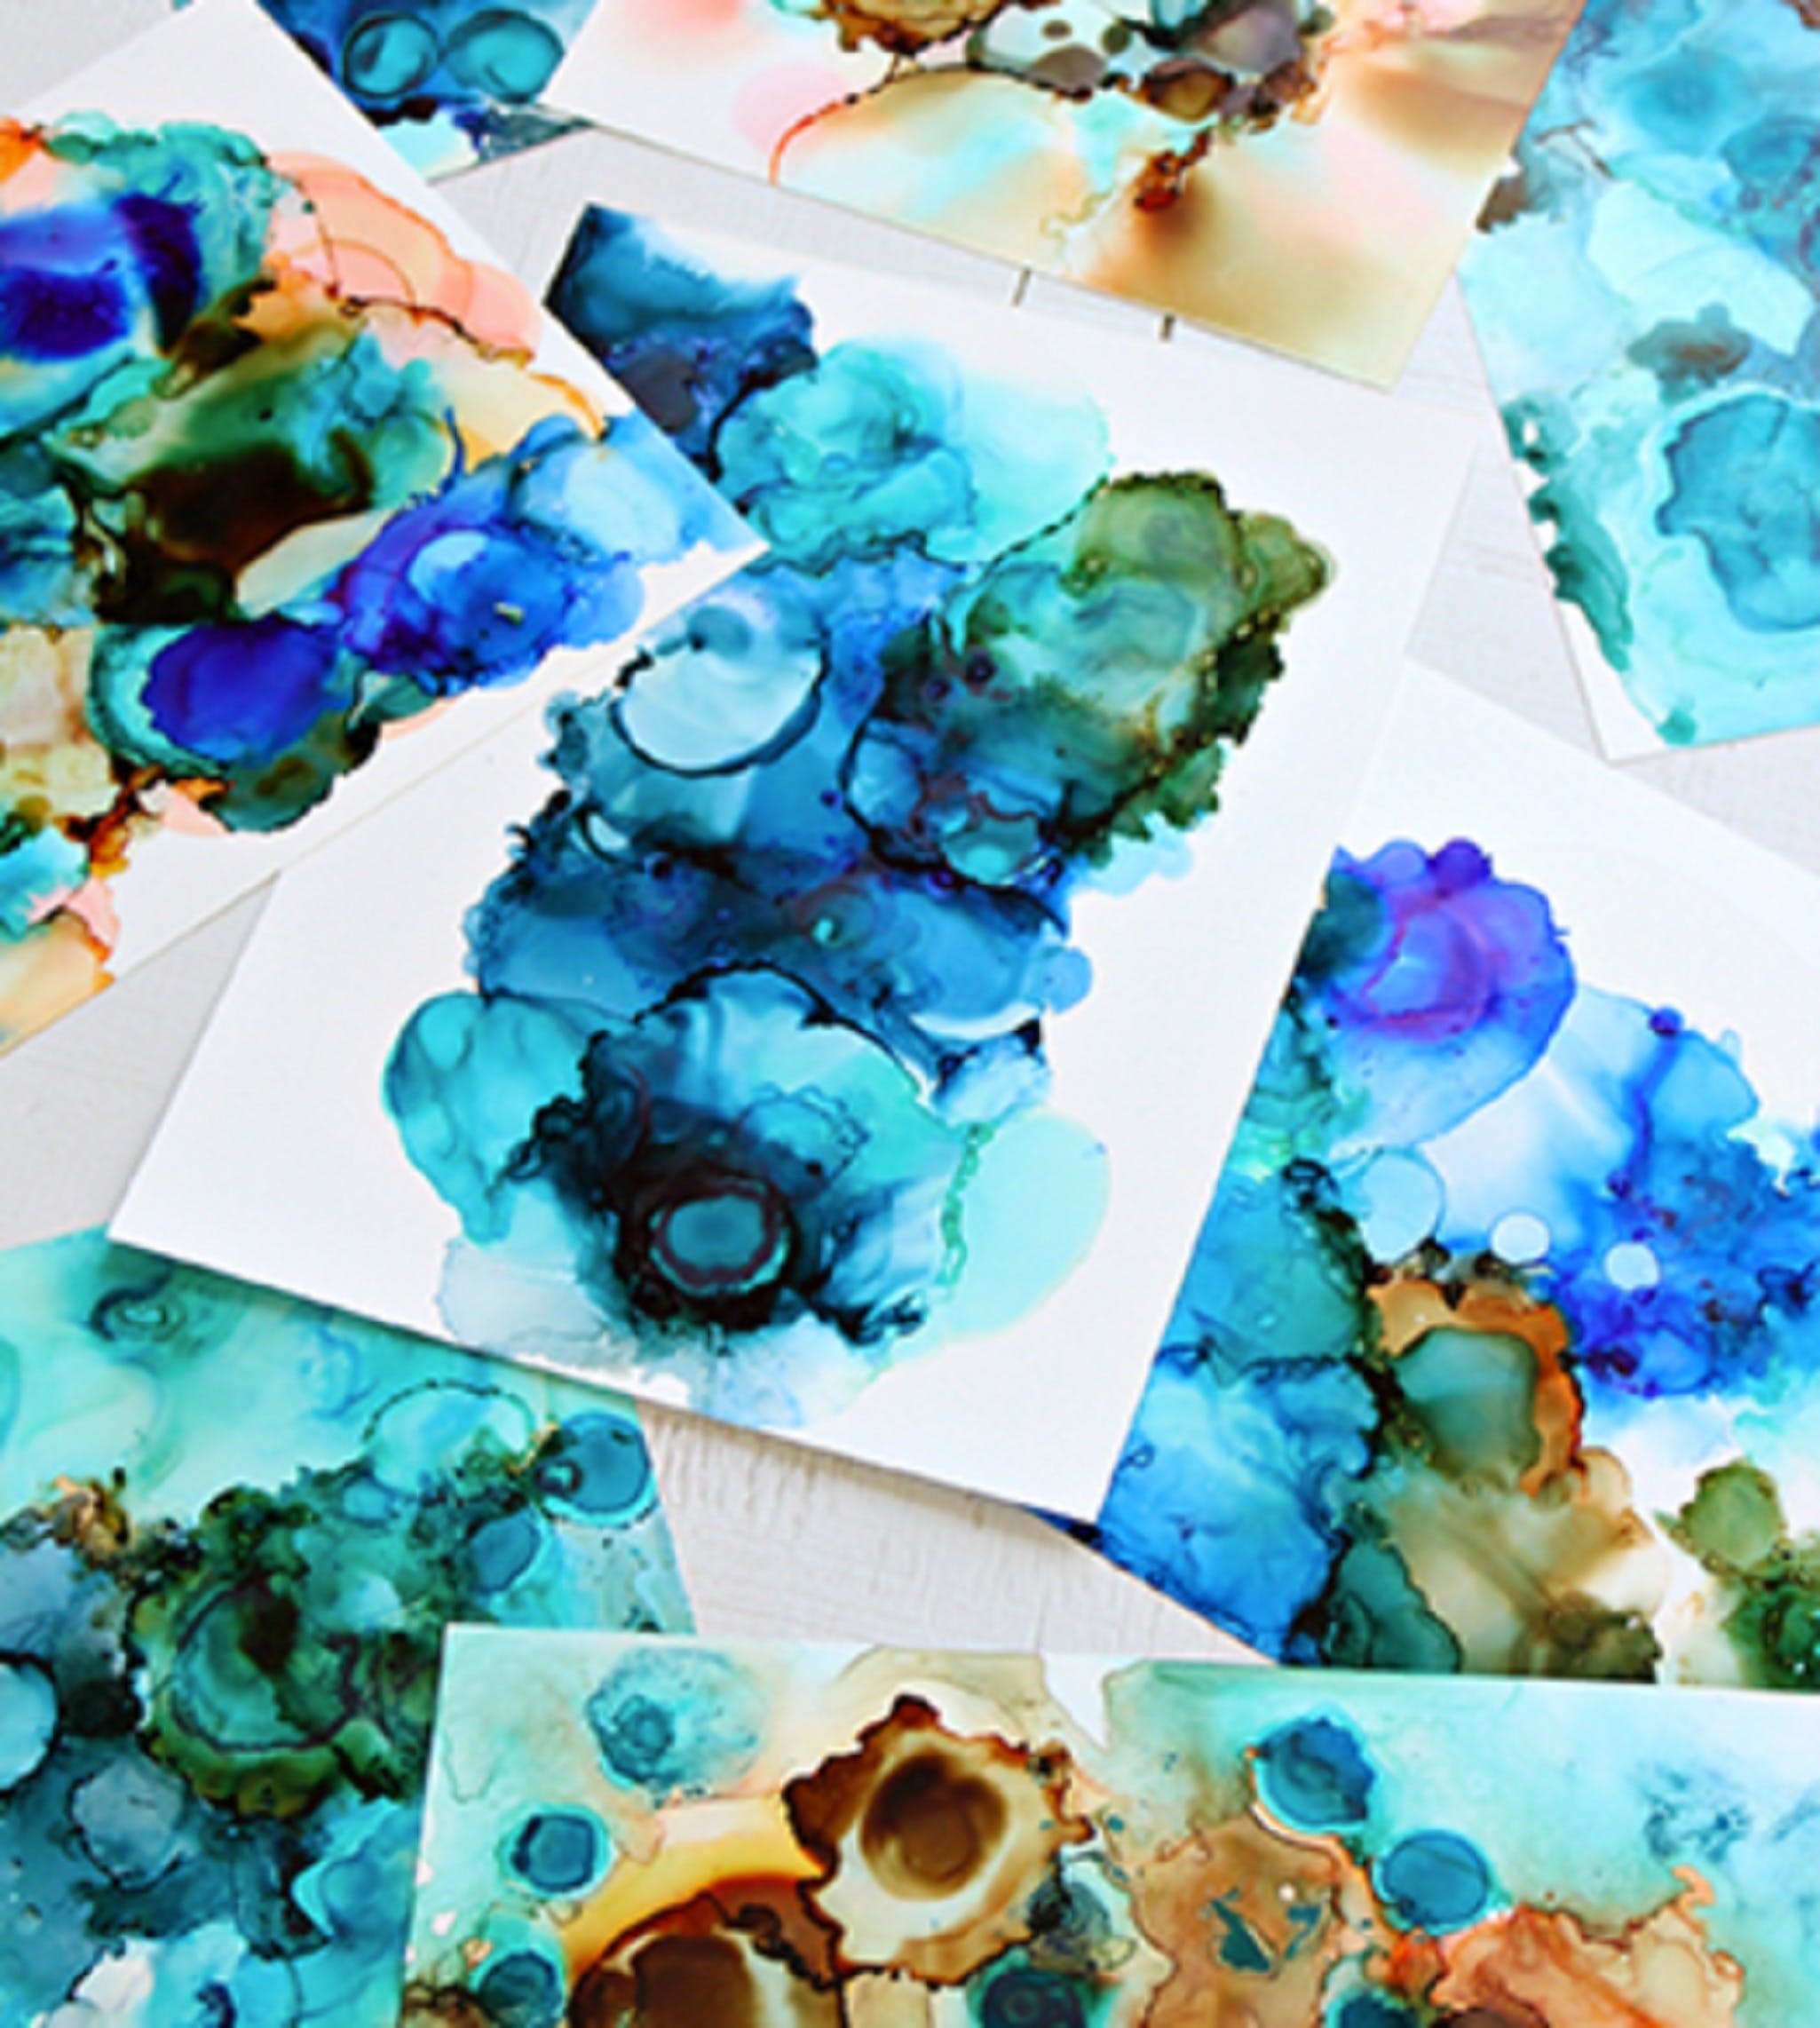 Alcohol Ink Art Class - Geraldton Accommodation